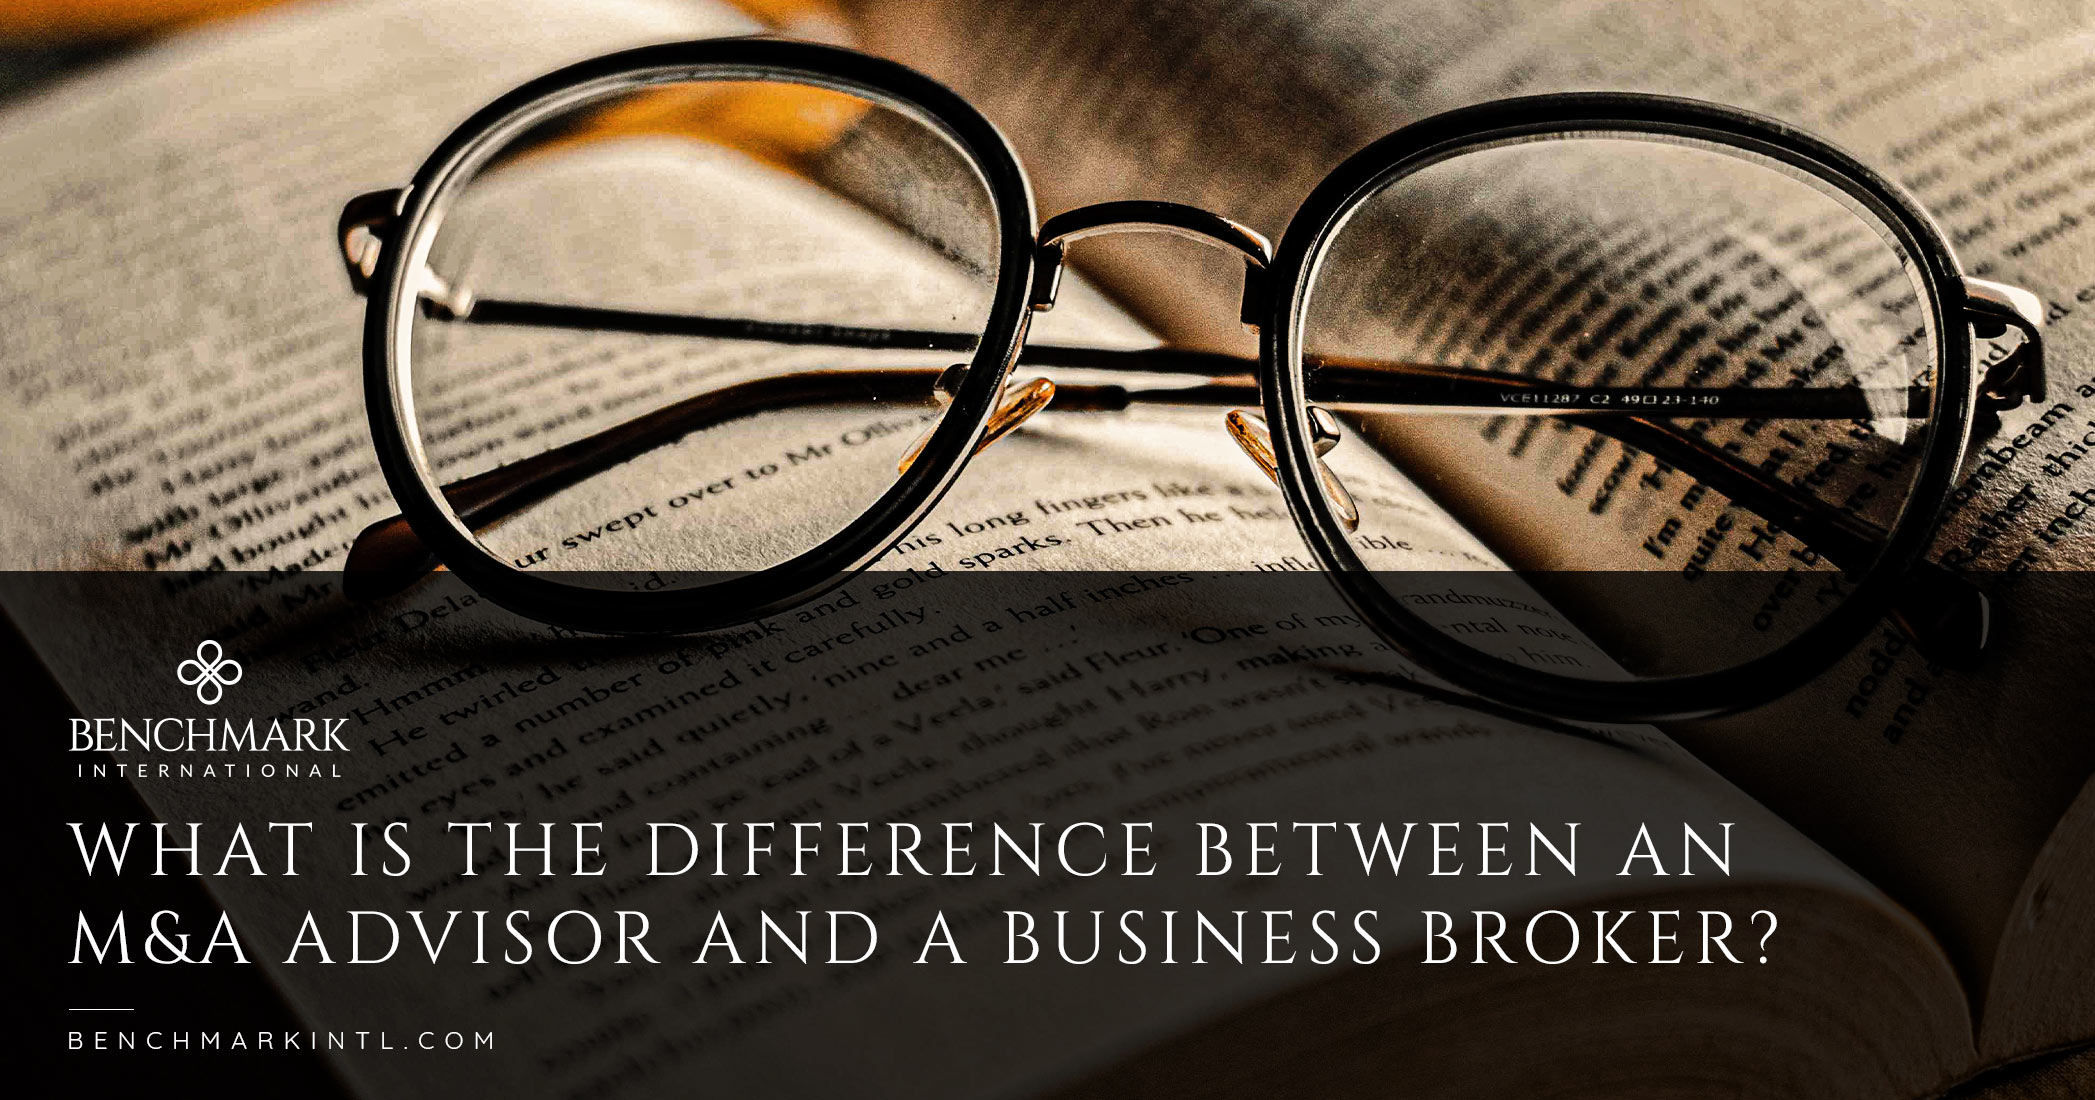 What Is The Difference Between An M&A Advisor And A Business Broker?